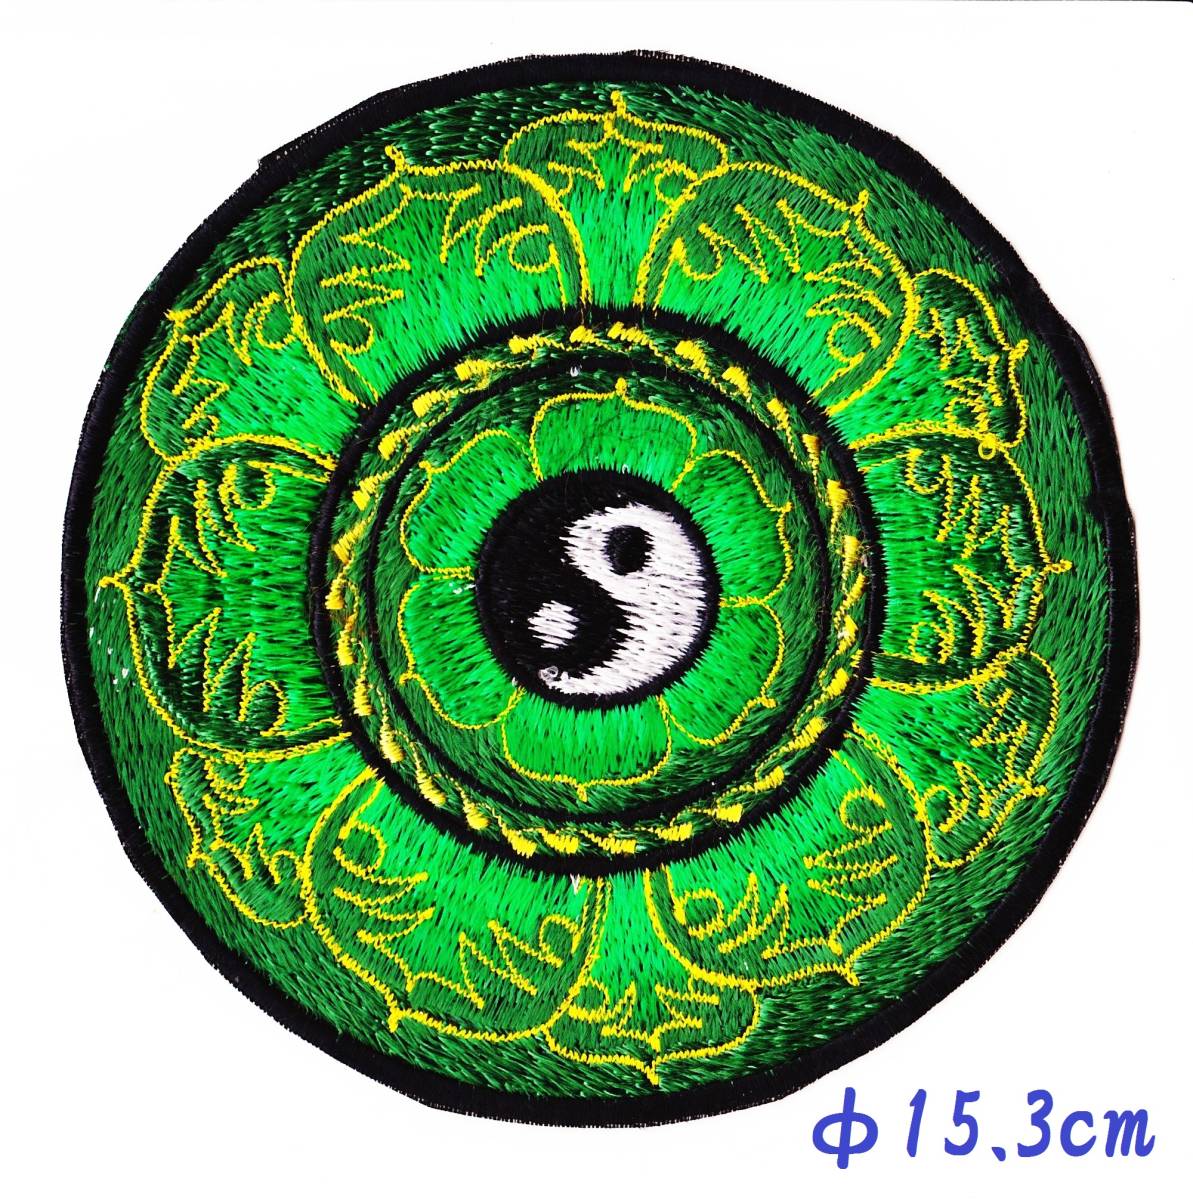 Last! Diameter 15.3cm [Free shipping under certain conditions] ☆New☆ Colorful psychedelic all-over embroidery patch *017* Interior pot stand Asian mushroom, sewing, embroidery, patch, Decoration material, patch